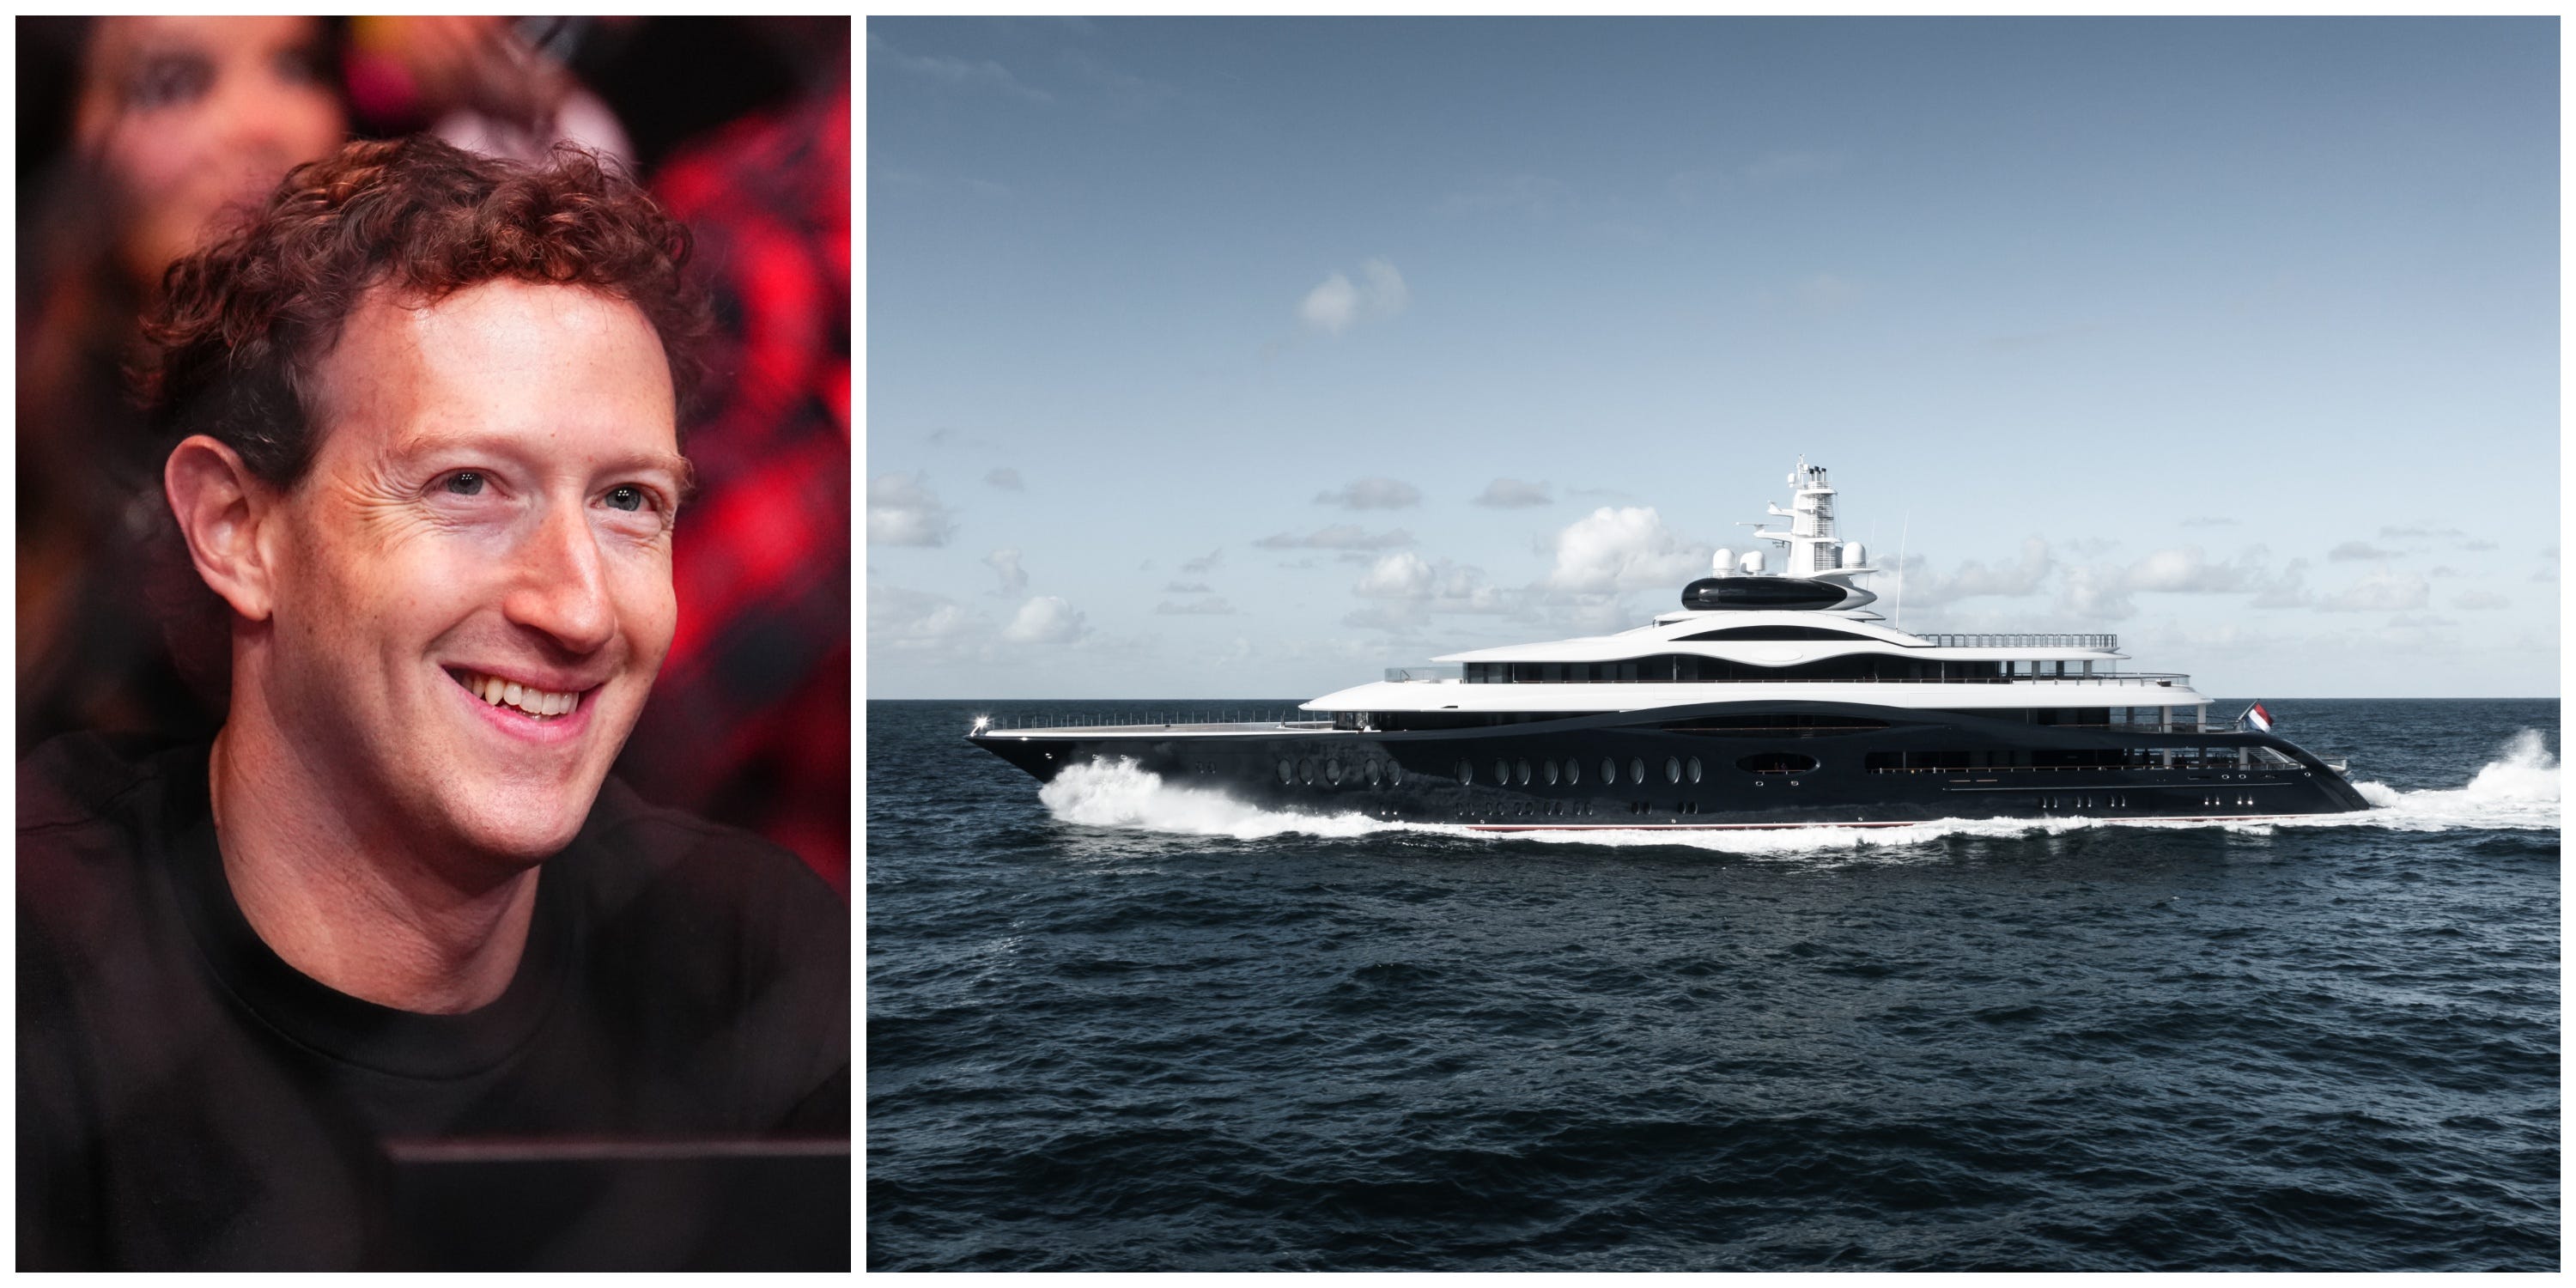 <ul class="summary-list"><li>Megayachts have become a status symbol for the richest of the rich.</li><li>In recent years, <a href="https://www.businessinsider.com/jeff-bezos-yacht-superyacht-koru-beautiful-amazing-insiders-say-2024-3">Jeff Bezos</a> and Mark Zuckerberg have splurged on enormous boats.</li><li>These are the biggest yachts owned by tech billionaires.</li></ul><p>The average Joe celebrating a personal renaissance after, say, the end of a long-term relationship or when approaching a fresh decade might commemorate it with an ankle tattoo or a sports car. But if you're a <a href="https://www.businessinsider.com/billionaire-superyachts-luxury-cost-size-status-symbol-2024-3">billionaire, you may instead spend hundreds of millions on a yacht</a>.</p><p>A few years after he and his wife divorced, Jeff Bezos shelled out on a megayacht. Last year, Bezos debuted the 127-meter vessel "Koru," a Māori symbol that signifies a fresh start — perhaps referring to that with his <a href="https://www.businessinsider.com/jeff-bezos-lauren-sanchez-spotted-his-new-500-million-yacht-2023-5">fiancée Lauren Sanchez.</a></p><p>Earlier this year, just before his 40th birthday, <a href="https://www.businessinsider.com/mark-zuckerberg-bought-superyacht-launchpad-speculation-pictures-2024-3">Mark Zuckerberg became the rumored owner of a yacht</a> originally built for a Russian oligarch.</p><p><a href="https://www.businessinsider.com/how-rich-people-buy-yachts-jets-taking-loans-against-them-2022-1">Superyachts have increasingly become ultrawealthy status symbols</a>, providing highly secluded leisure and networking sites. They are — even more so than real estate — the single most expensive asset you can own.</p><p>"It's a bit of a celebration of your success in life, of wealth," Giovanna Vitelli, the vice president of the Azimut Benetti Group, the world's biggest producer of superyachts, told Business Insider.</p><p>While many tech billionaires have bought yachts, the richest of the rich, like Bezos, Zuckerberg, and Oracle cofounder Larry Ellison, have gone bigger. Their boats are virtual palaces at sea, decked with amenities like gyms, spas, pools, nightclubs, and movie theaters.</p><p>A look at these megayachts — broadly defined as over 70 meters long, mostly custom-built, and often costing nine figures — offers a glimpse into how the .00001% lives. It's something few others will ever get to experience. Even <a href="https://www.businessinsider.com/superyacht-etiquette-how-to-behave-on-yacht-2024-4">chartering a yacht</a> of this size for a week typically costs upwards of $1 million.</p><p>One major thing that hundreds of millions of dollars can buy is privacy. There are likely yachts that have not been publicly recorded or registered — for example, Evan Spiegel is rumored to own the 94-meter megayacht Bliss. In an <a href="https://www.businessinsider.com/inside-the-secretive-world-of-superyachts-2023-8">industry ruled by discretion</a>, deciphering who owns what is typically an exercise in stringing together many clues.</p><p>Here are the largest yachts owned by tech billionaires, listed in order of length.</p><div class="read-original">Read the original article on <a href="https://www.businessinsider.com/biggest-yachts-owned-by-tech-billionaires-mark-zuckerberg-jeff-bezos-2024-5">Business Insider</a></div>